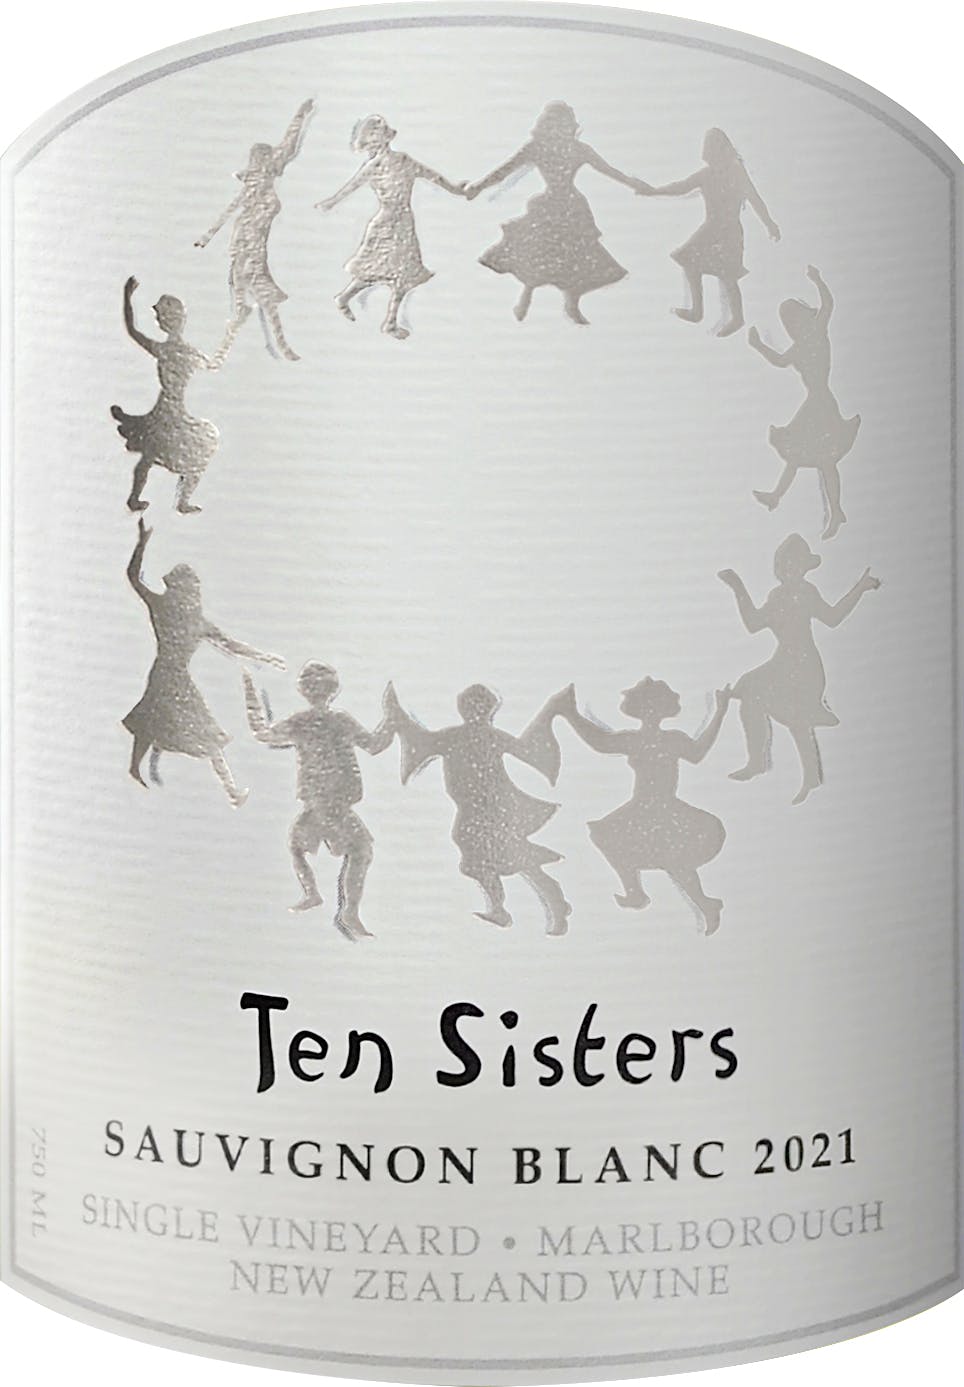 Label for Ten Sisters